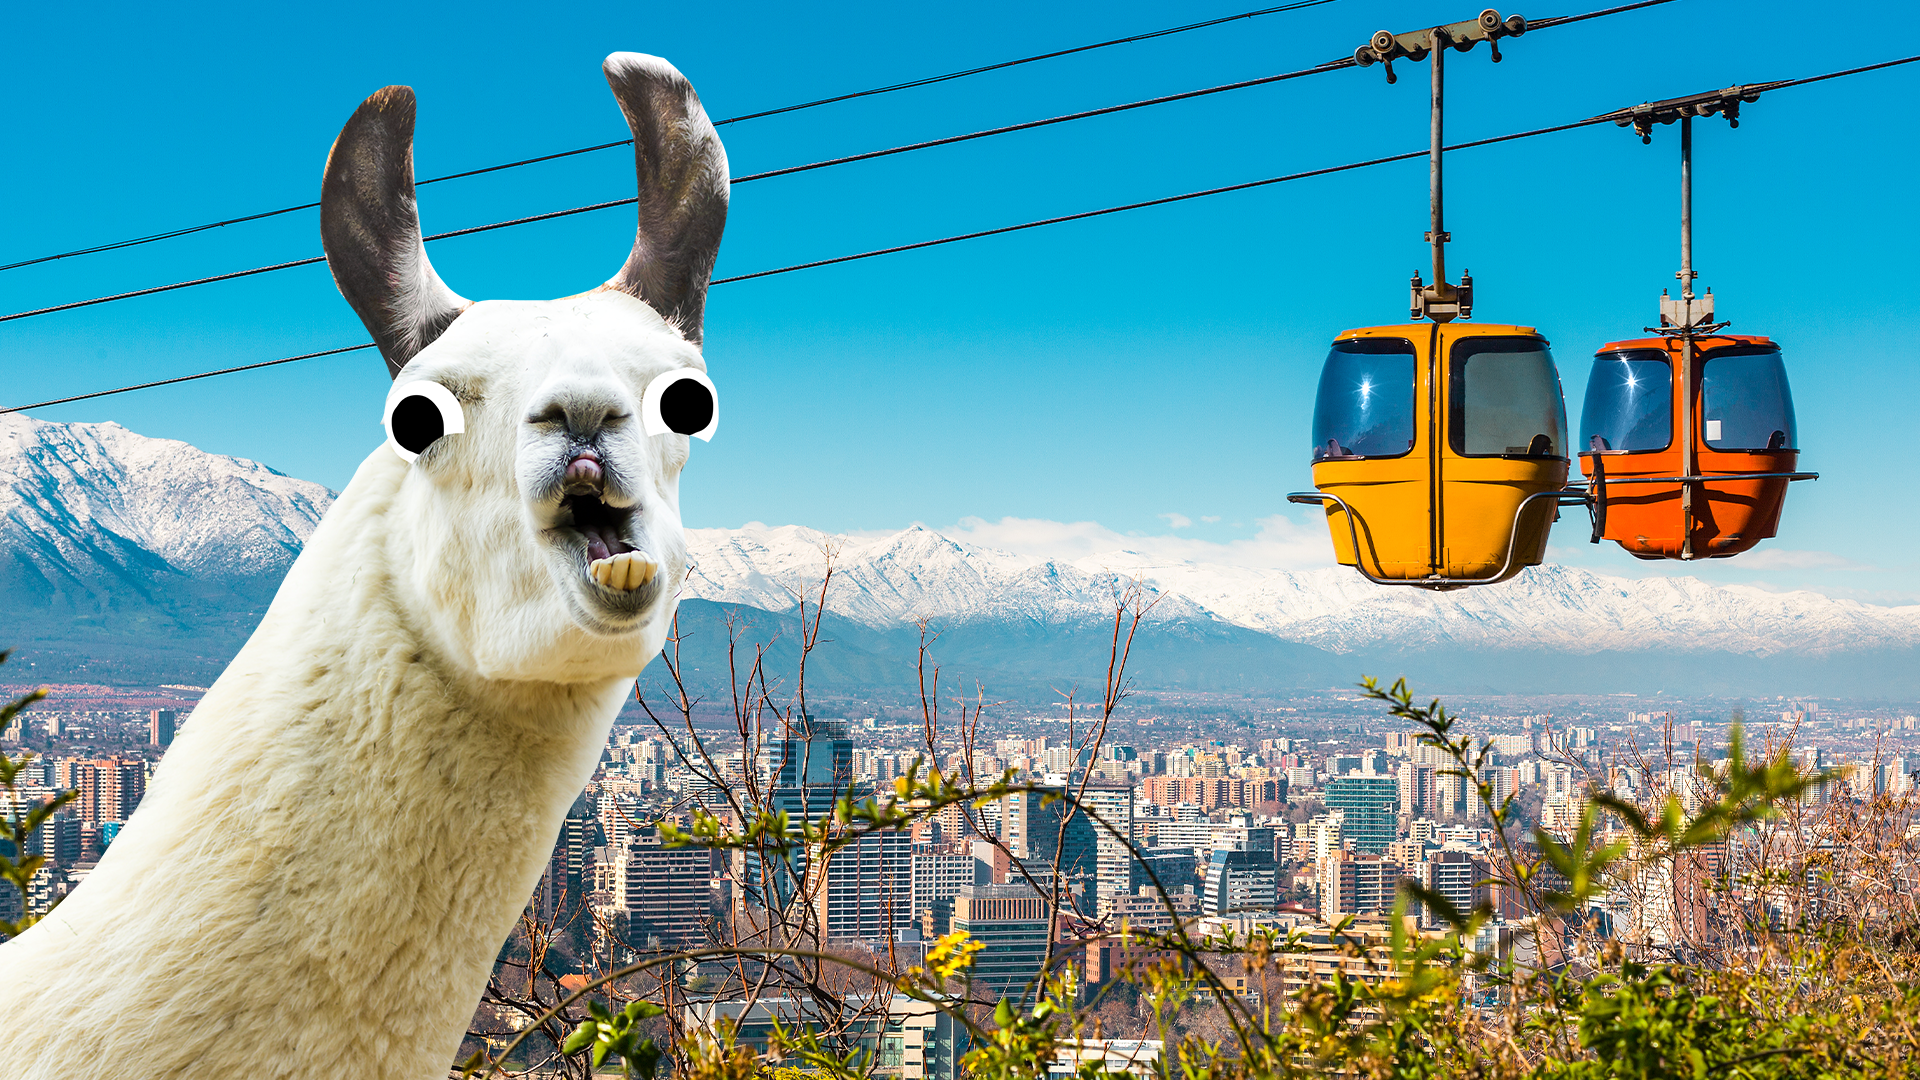 Llama and scene of South American country